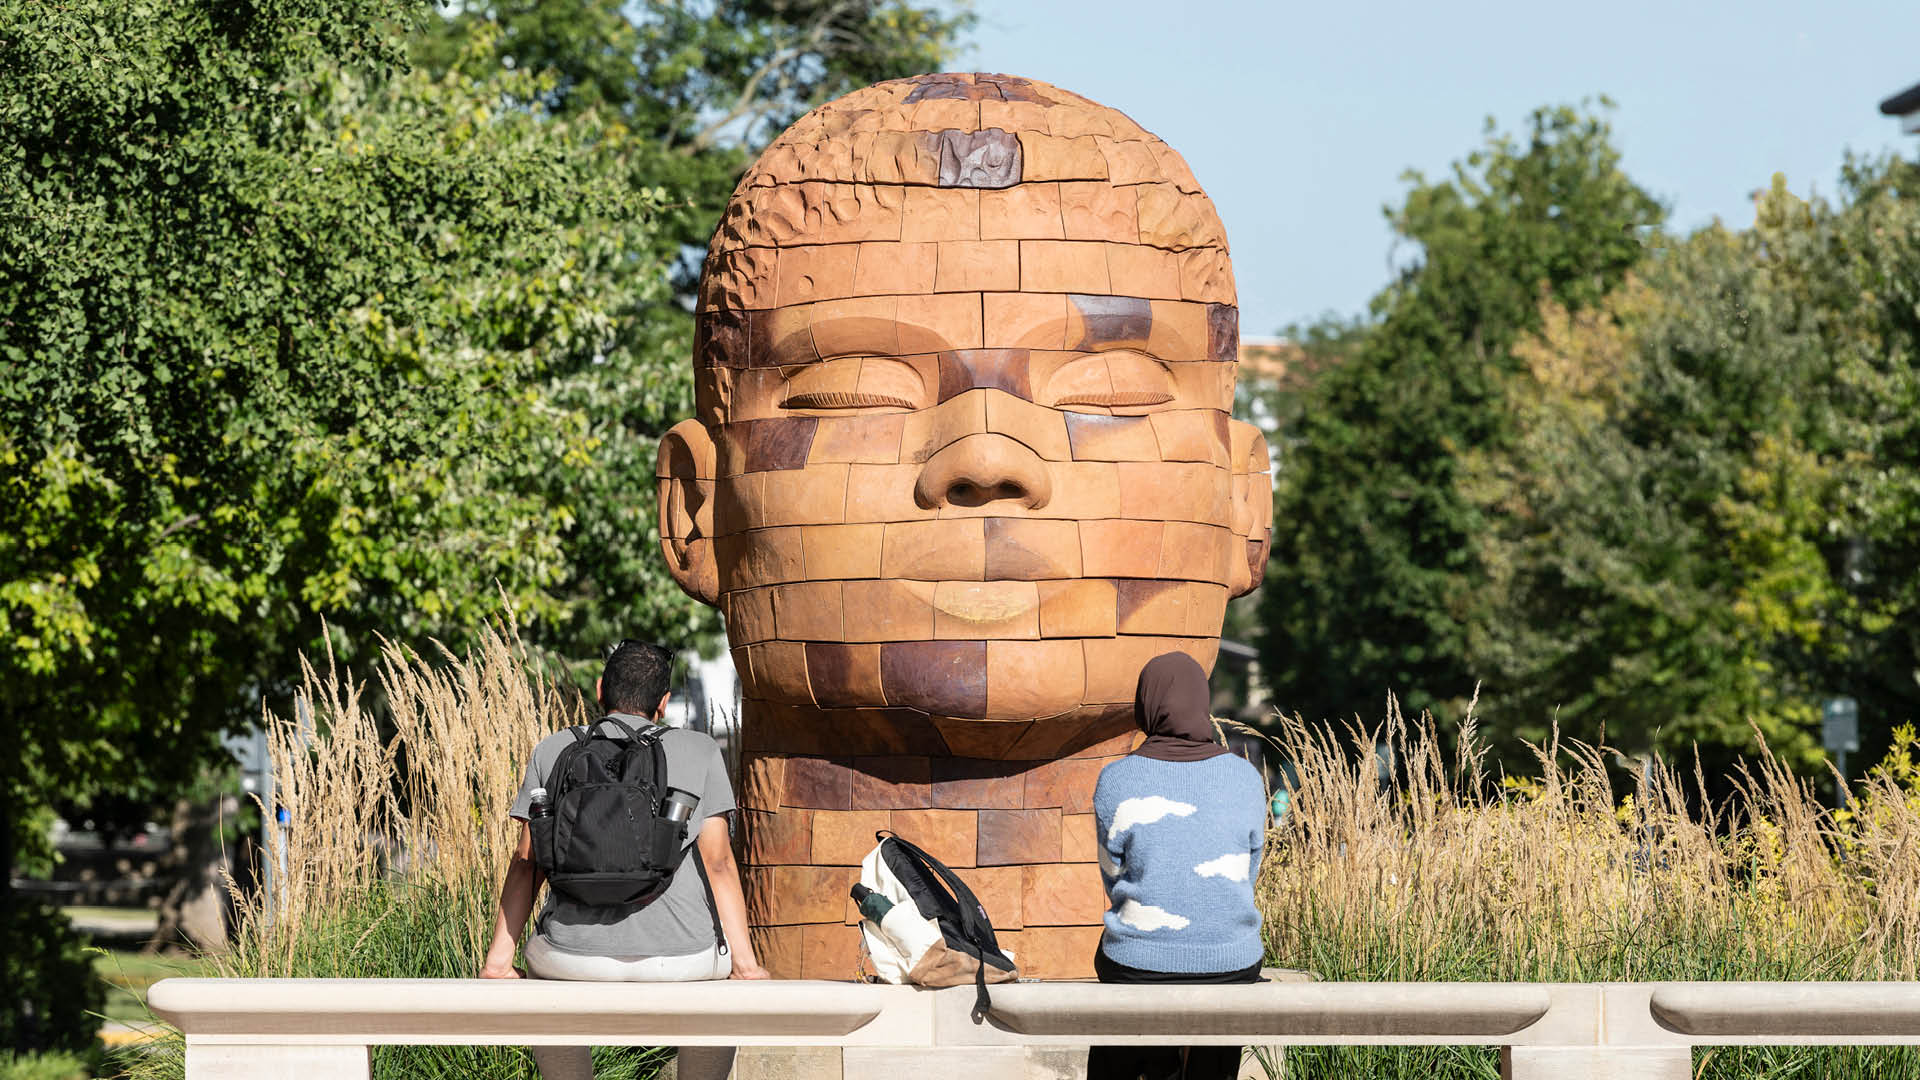 Two students sit in front of a large sculpture of a head made of bricks.